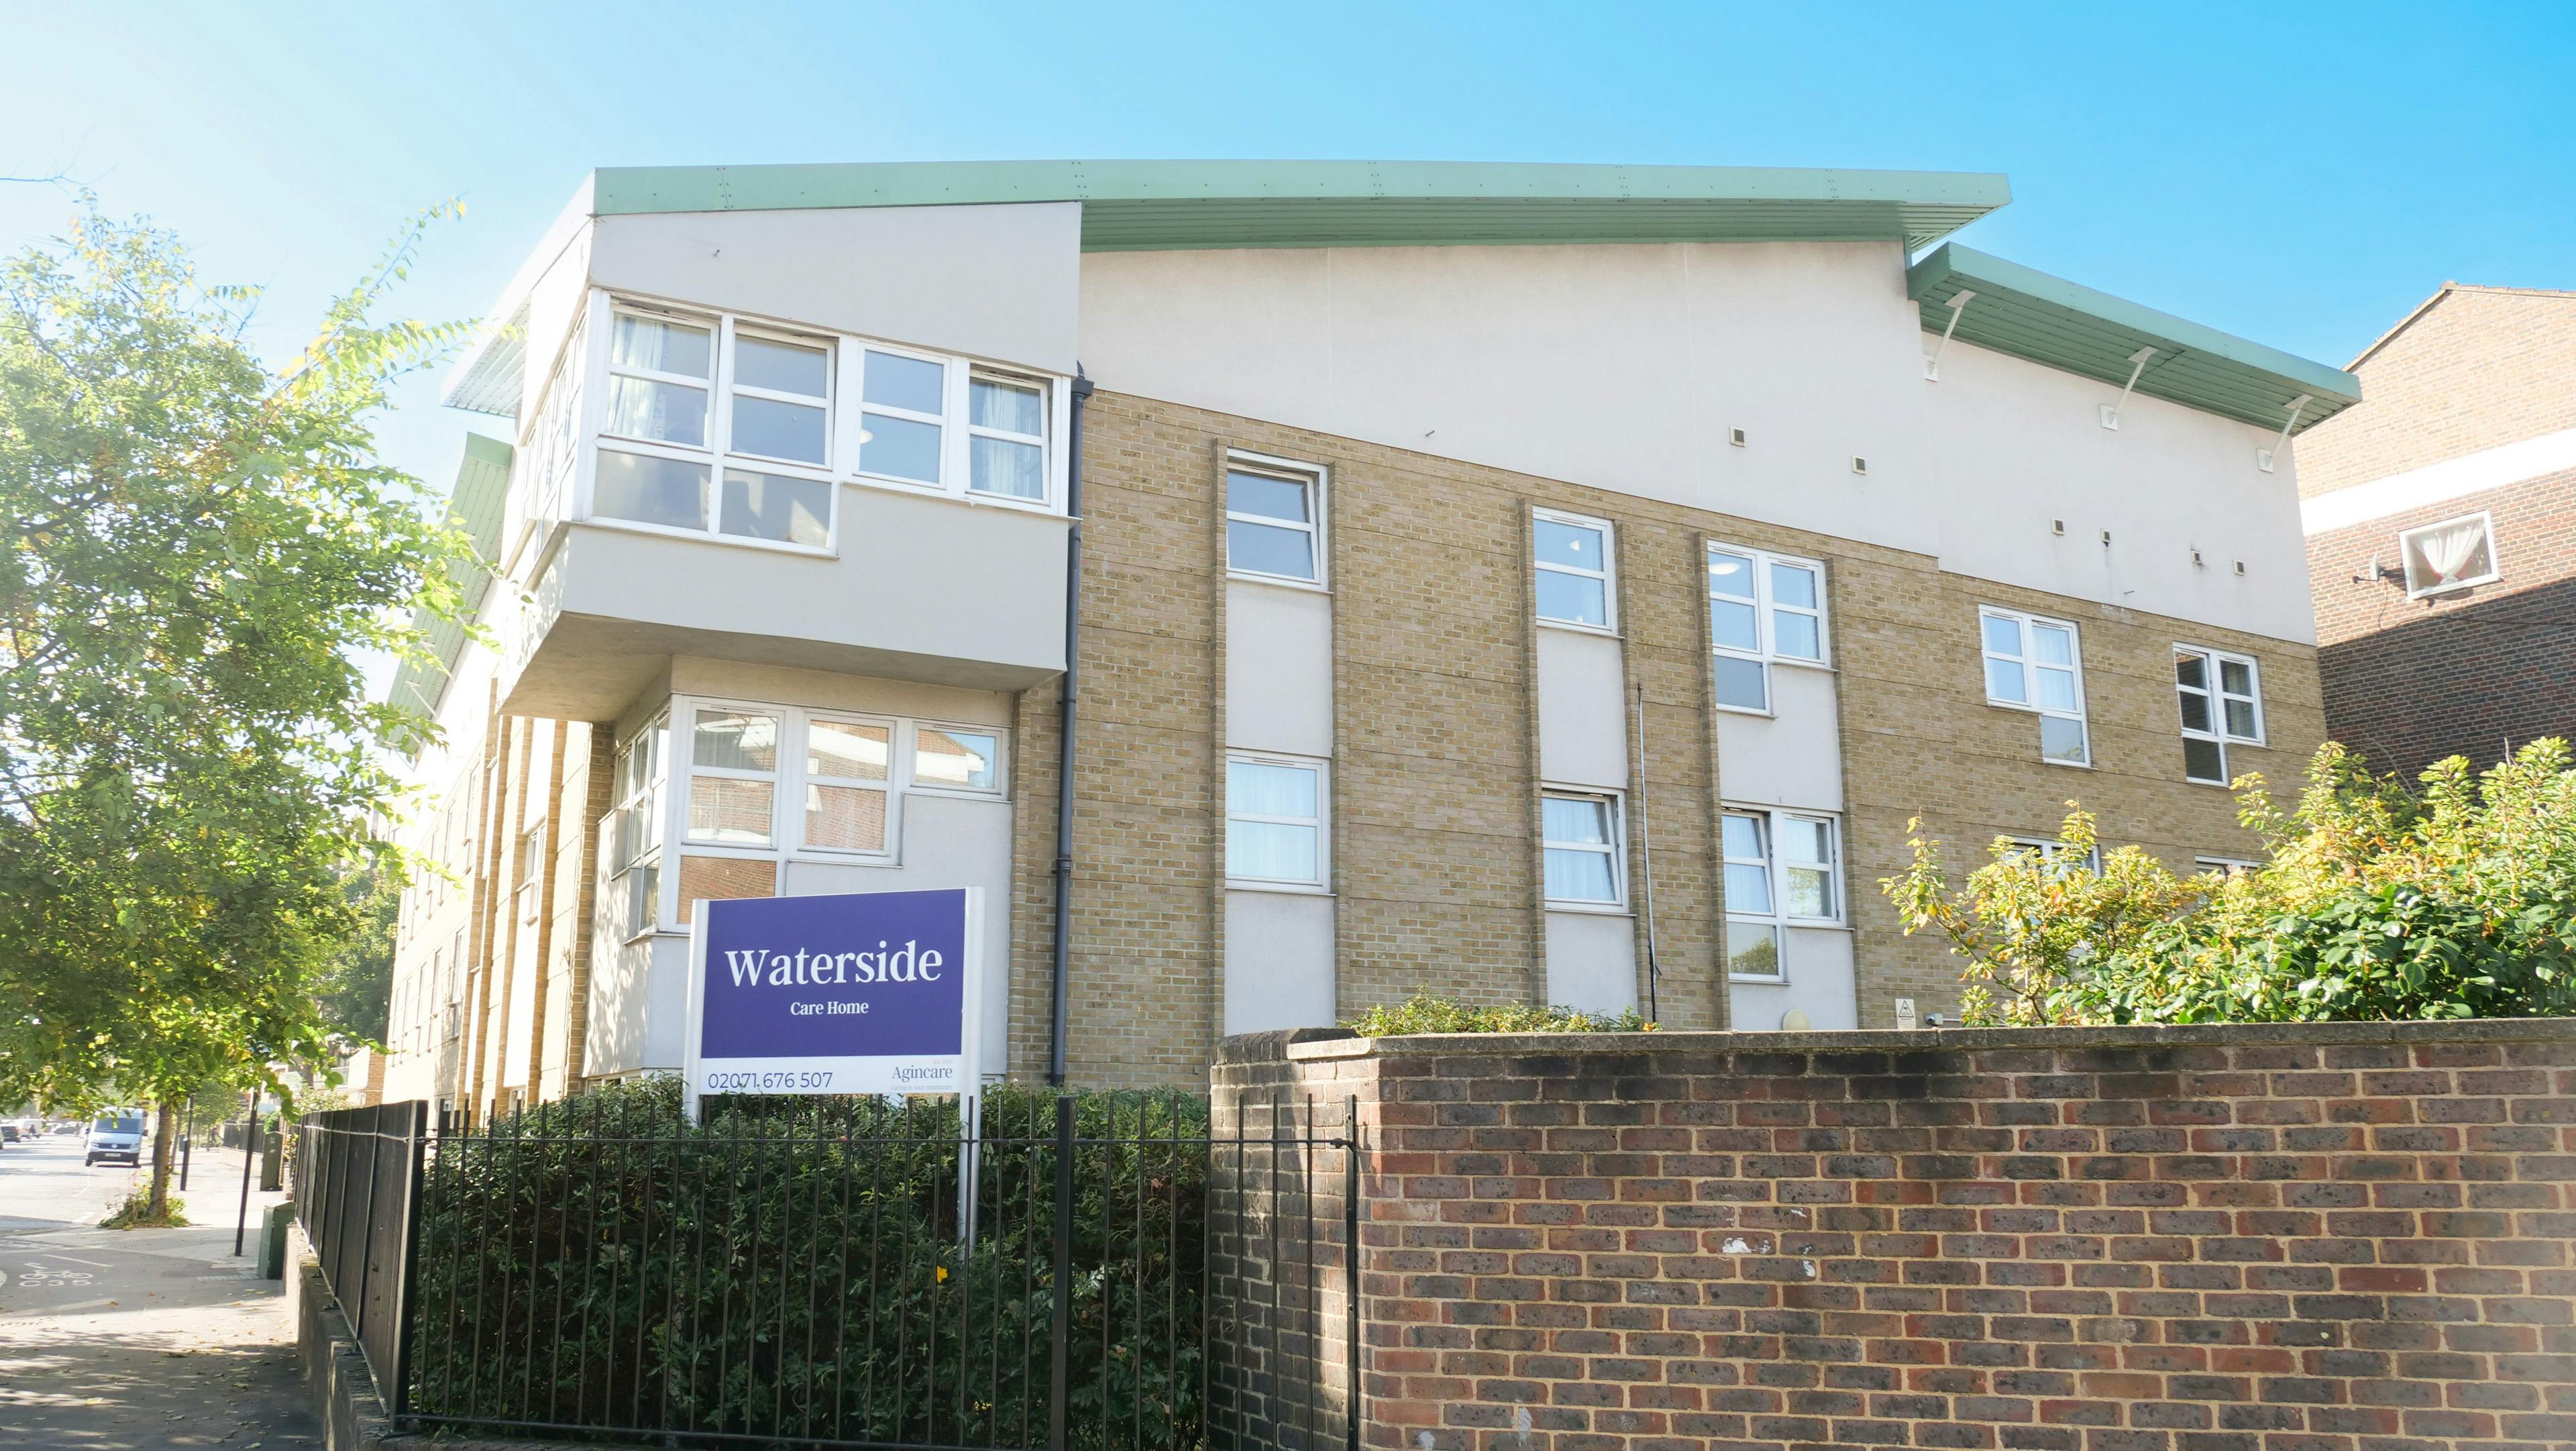 Waterside care home in Peckham 1